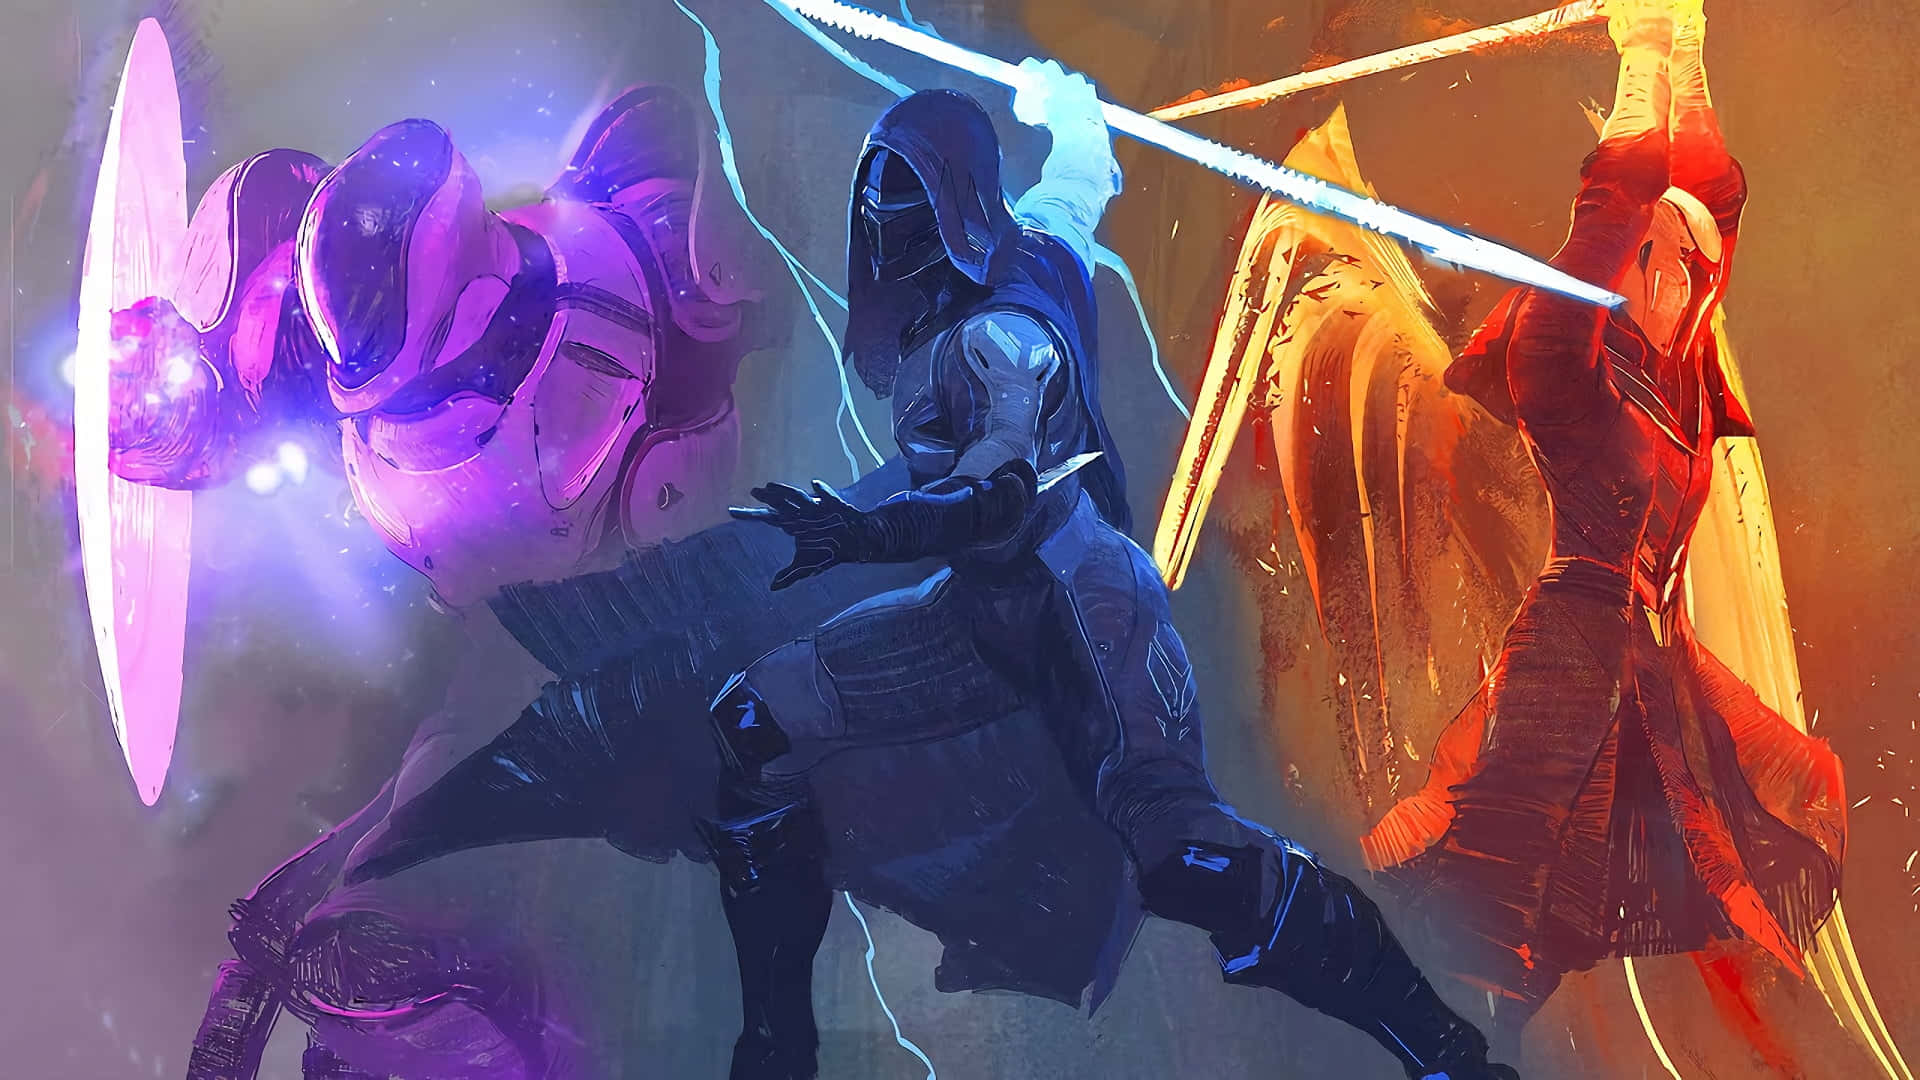 Action-Packed Destiny Characters in Battle Wallpaper